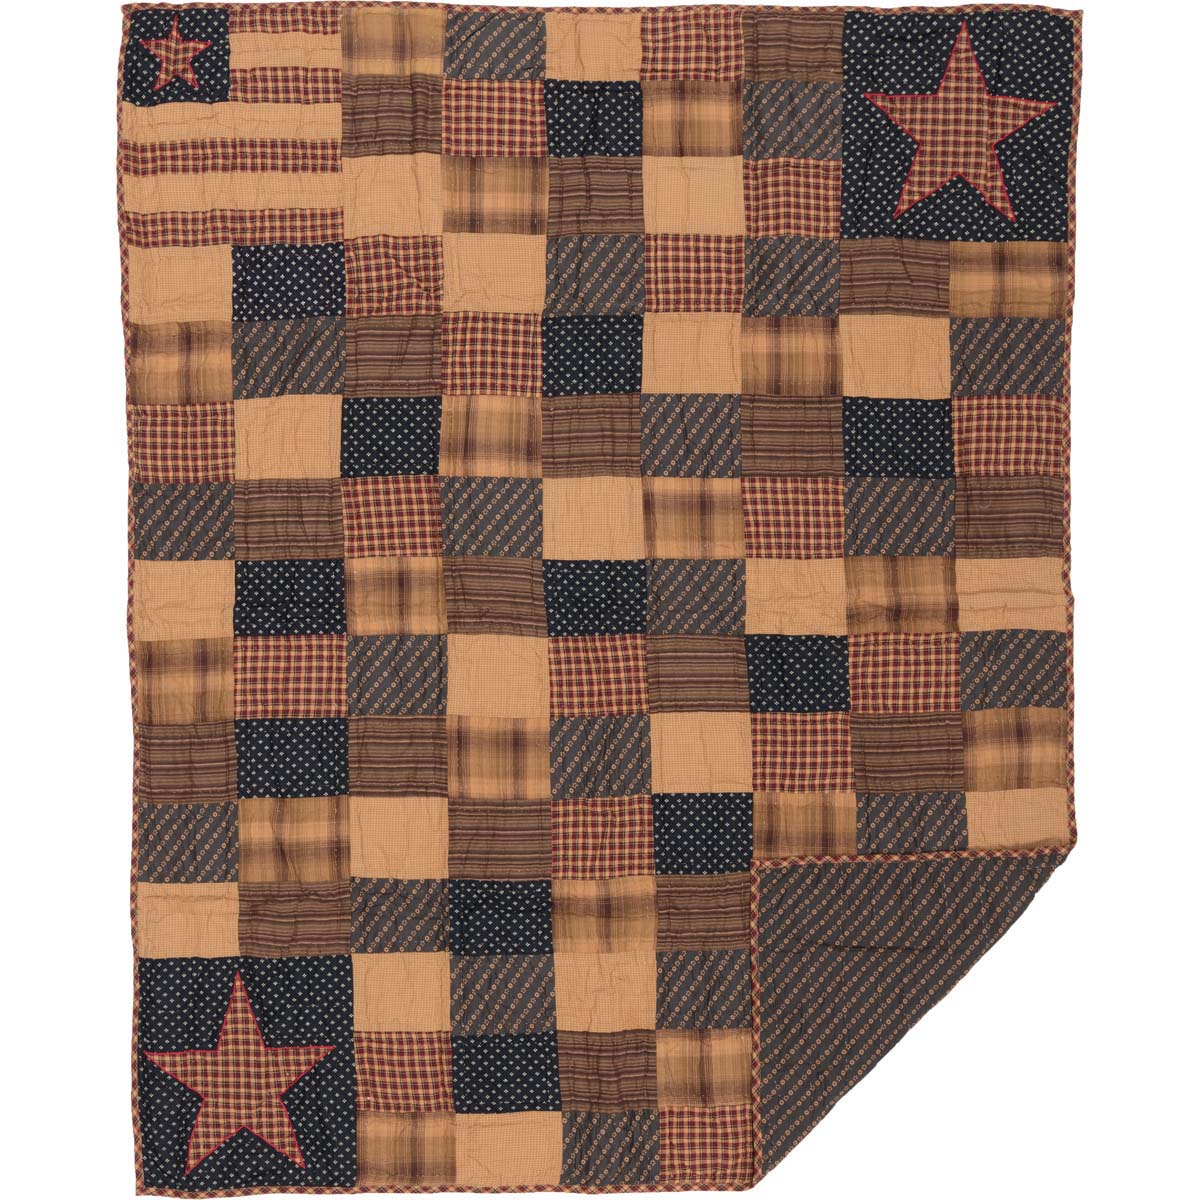 Patriotic Patch Quilted Throw 50" x 60"